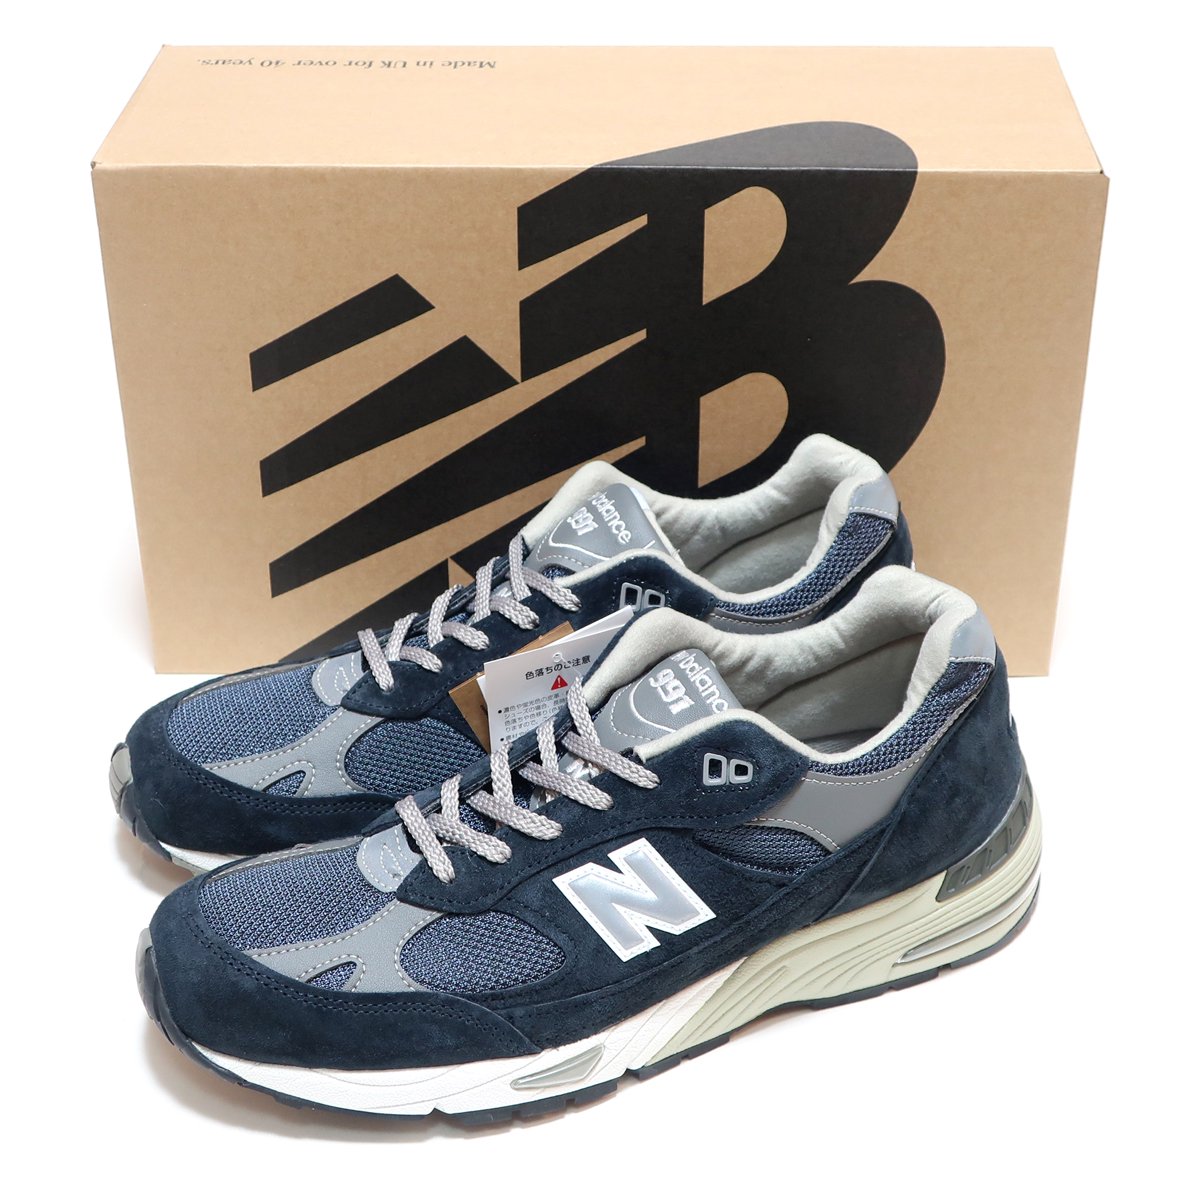 NEW BALANCE M991NV NAVY SUEDE MADE IN ENGLAND ( ニューバランス